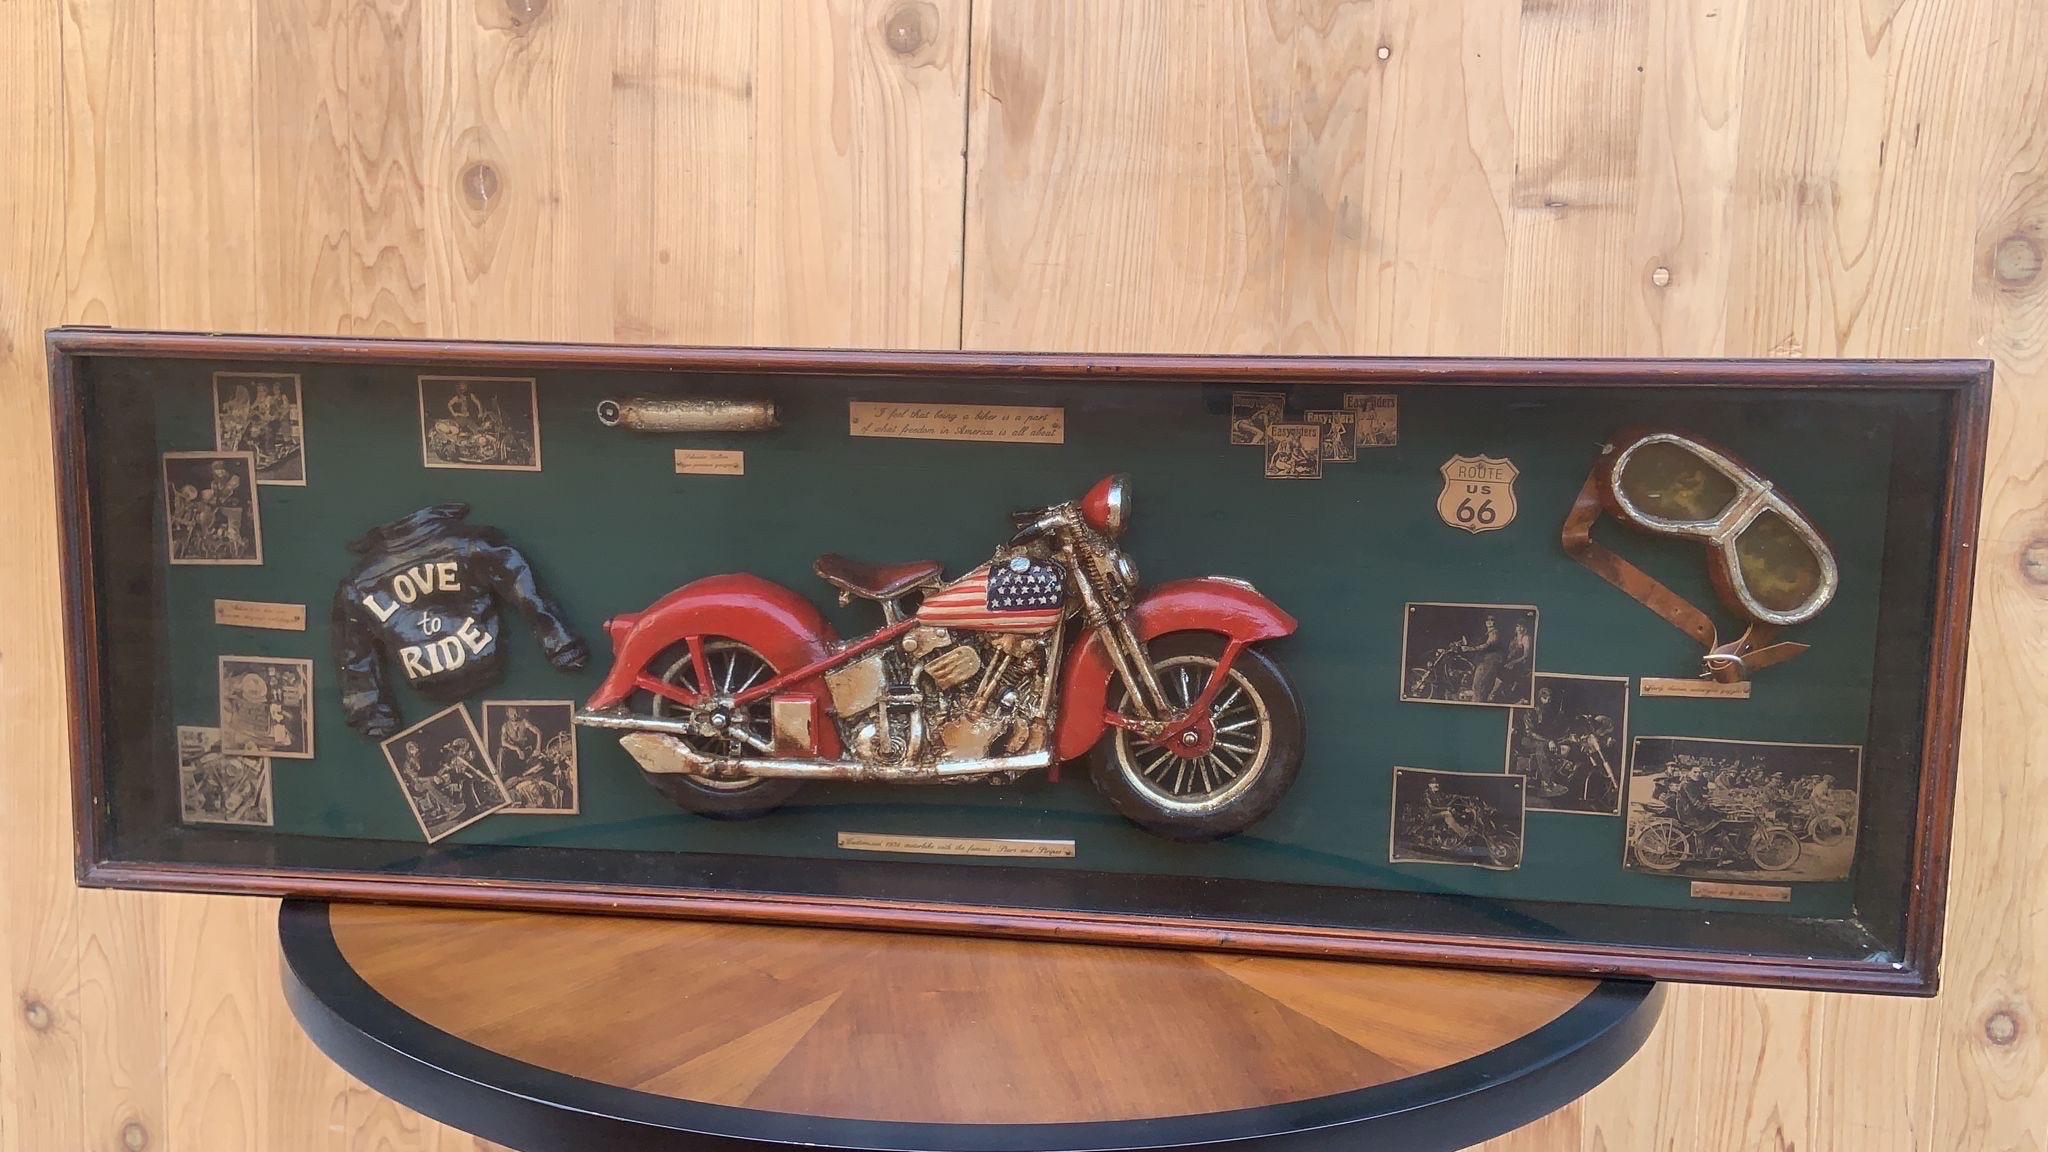 Vintage Harley Davidson Shadow Box 3D Wall Art

Collectible, great gift for a rider. Live to Ride! 

Circa: 1936

Dimensions:
H: 13”
W: 41.5”
D: 3.5”
